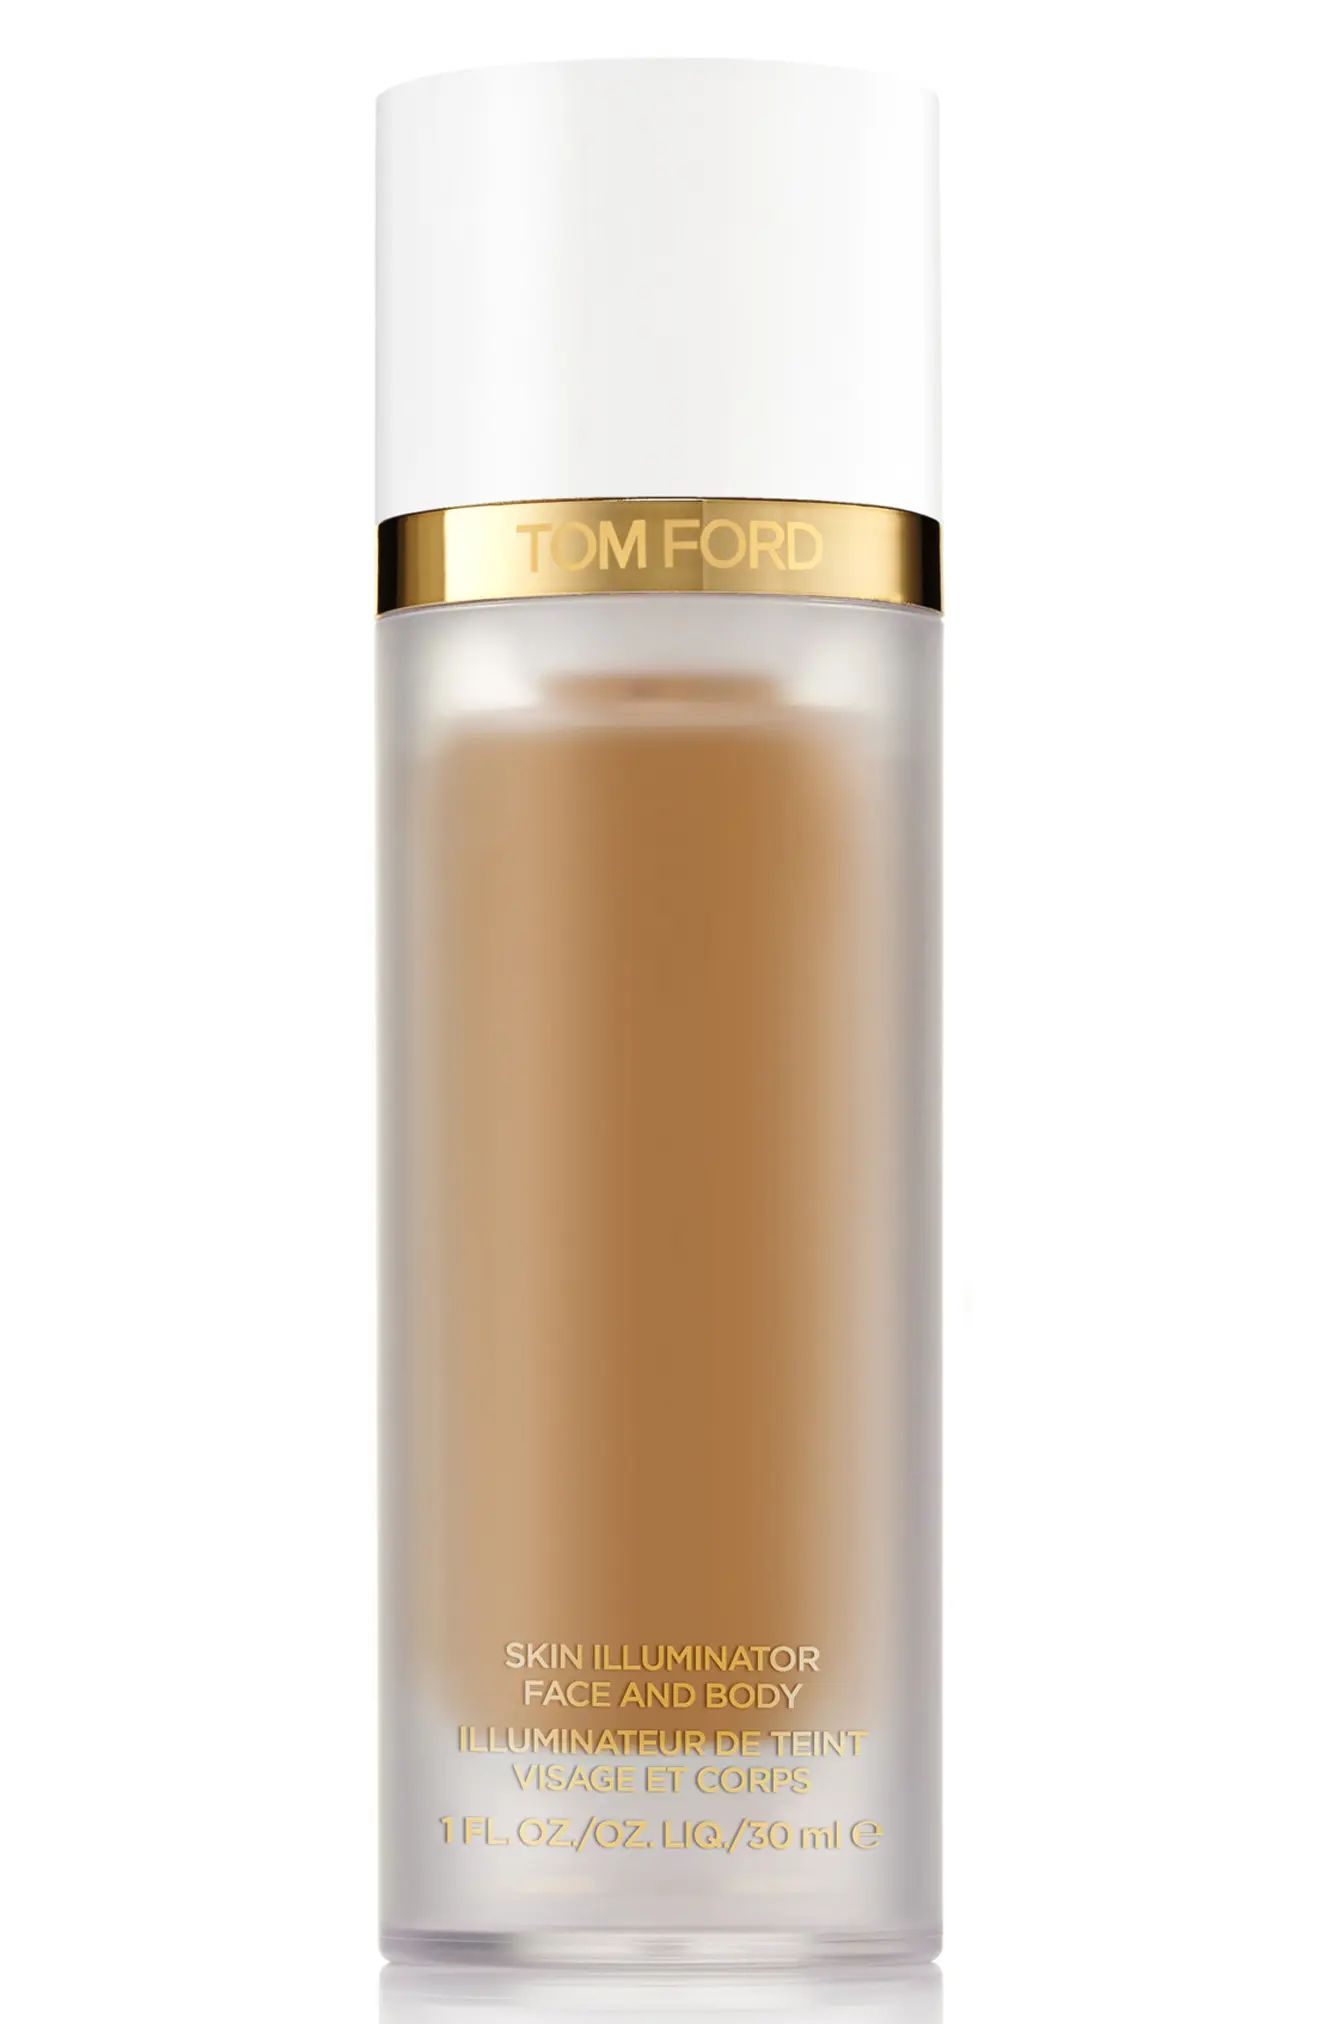 Tom Ford Face And Body Skin Illuminator - 03 Bronze Glow | Nordstrom